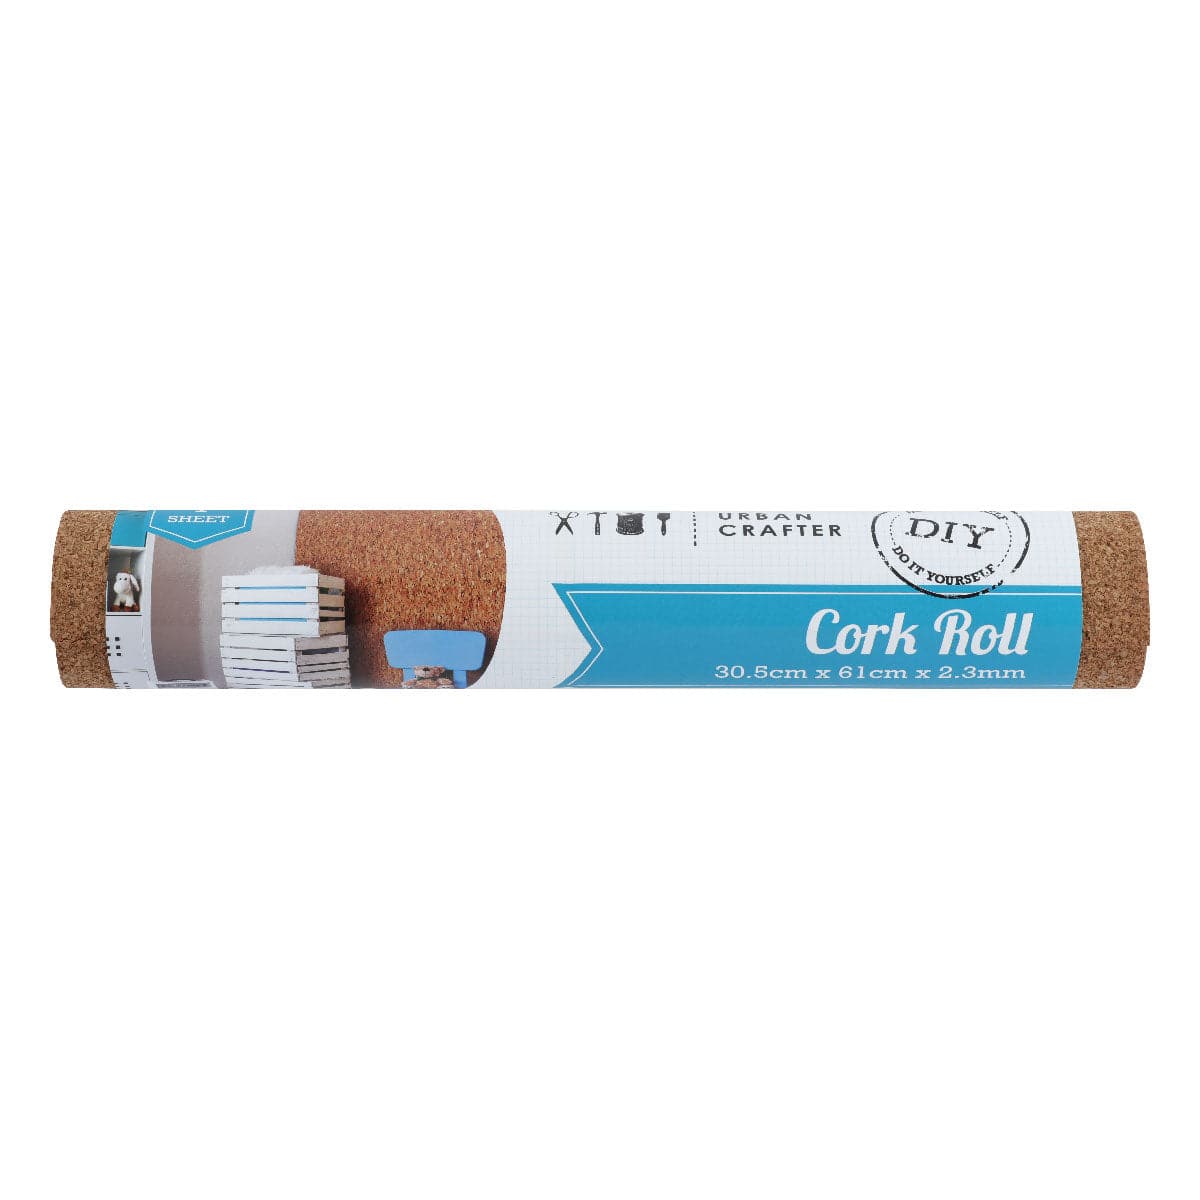 Image of Urban Crafter Cork Roll 30.5 x 61 x 2.3mm 1 Piece